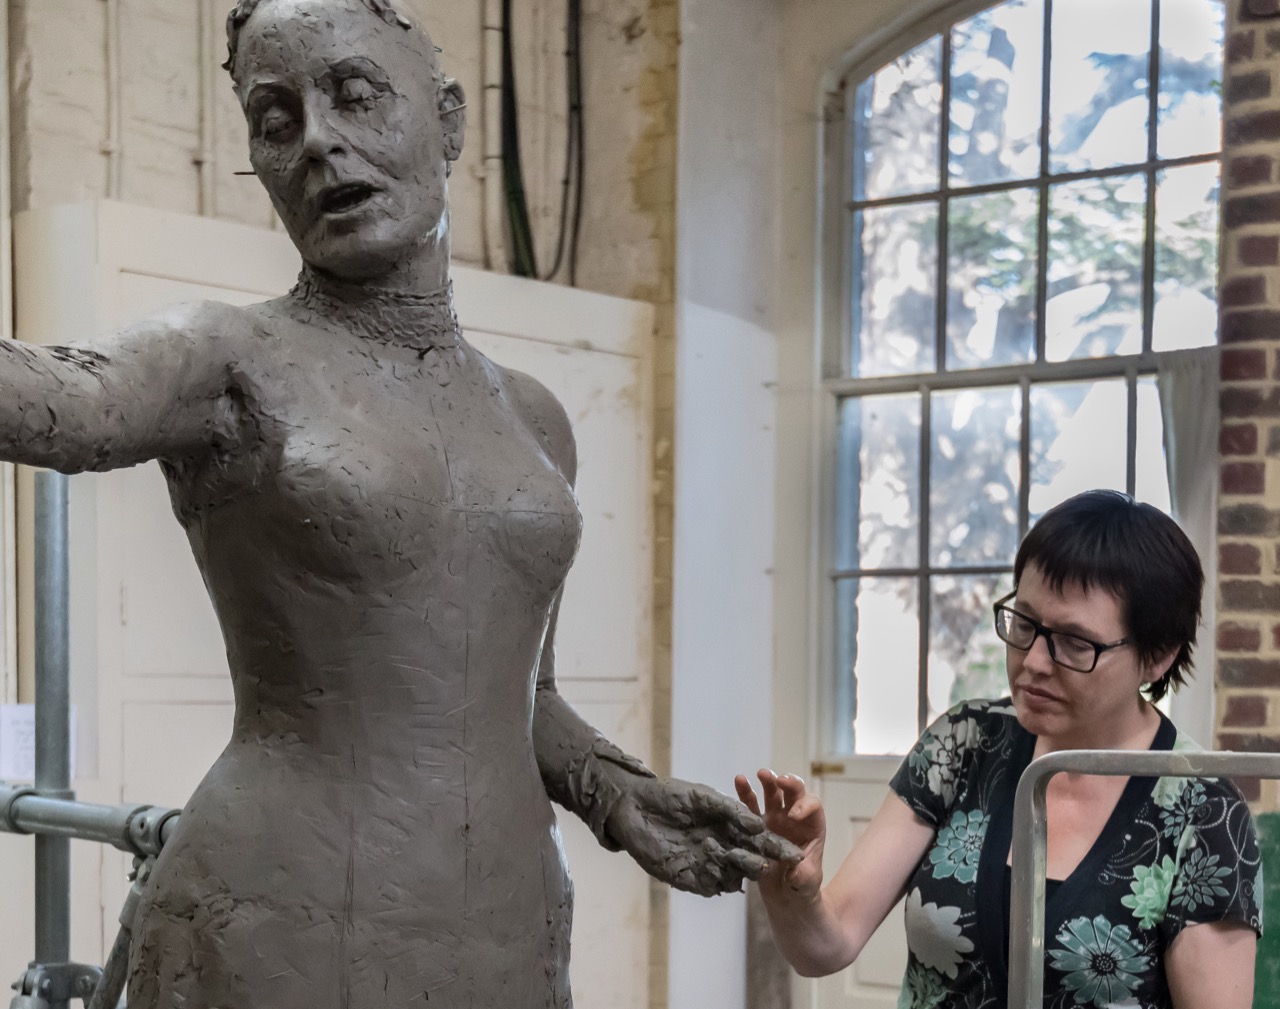 Hazel with the clay Our Emmeline - photo by Nigel Kingston